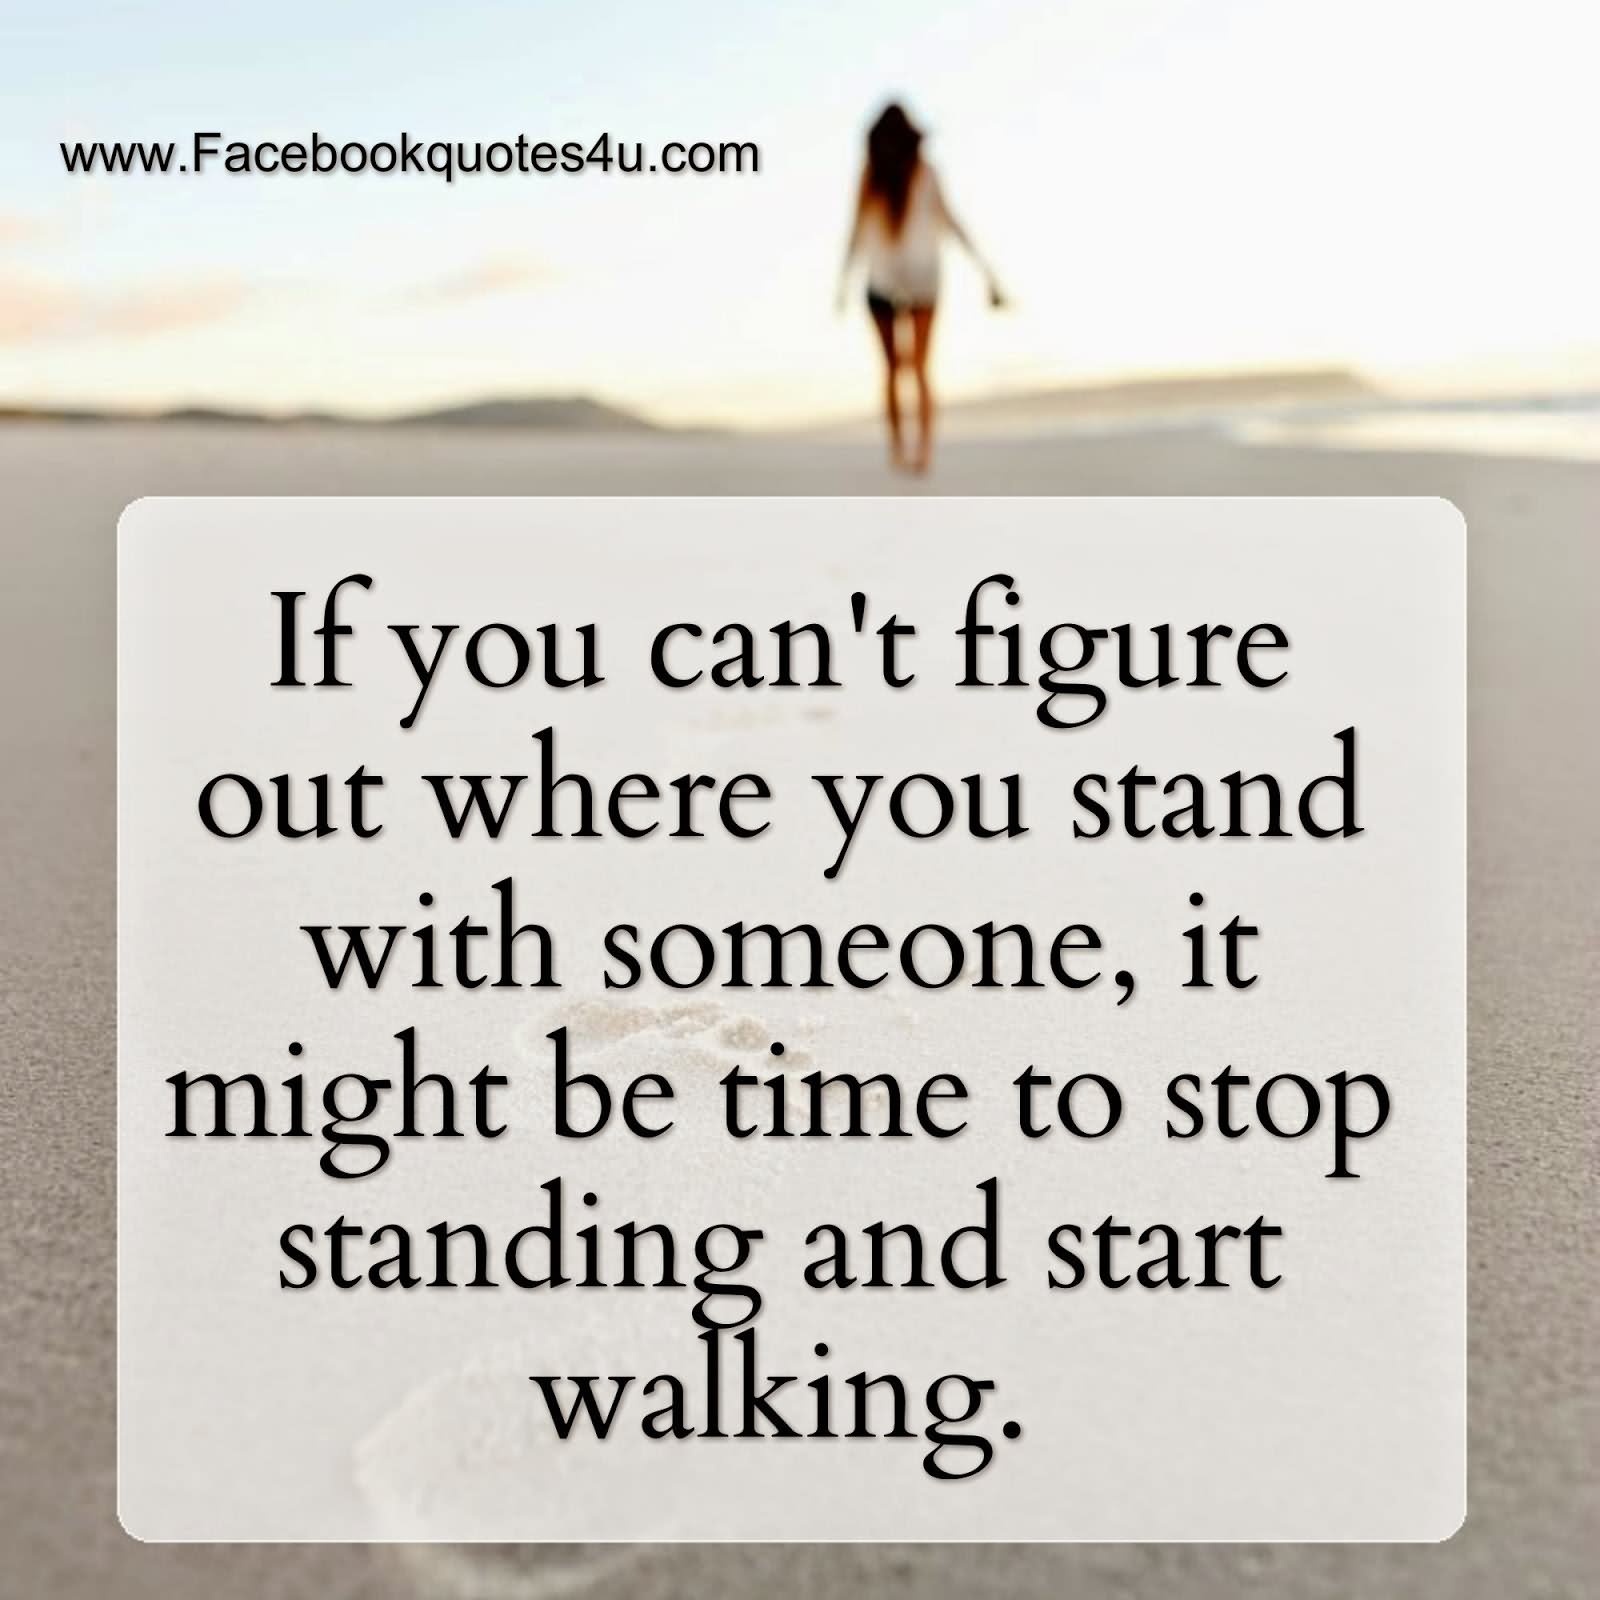 If you can't figure out where you stand with someone, it might be time to stop standing and start walking (6)